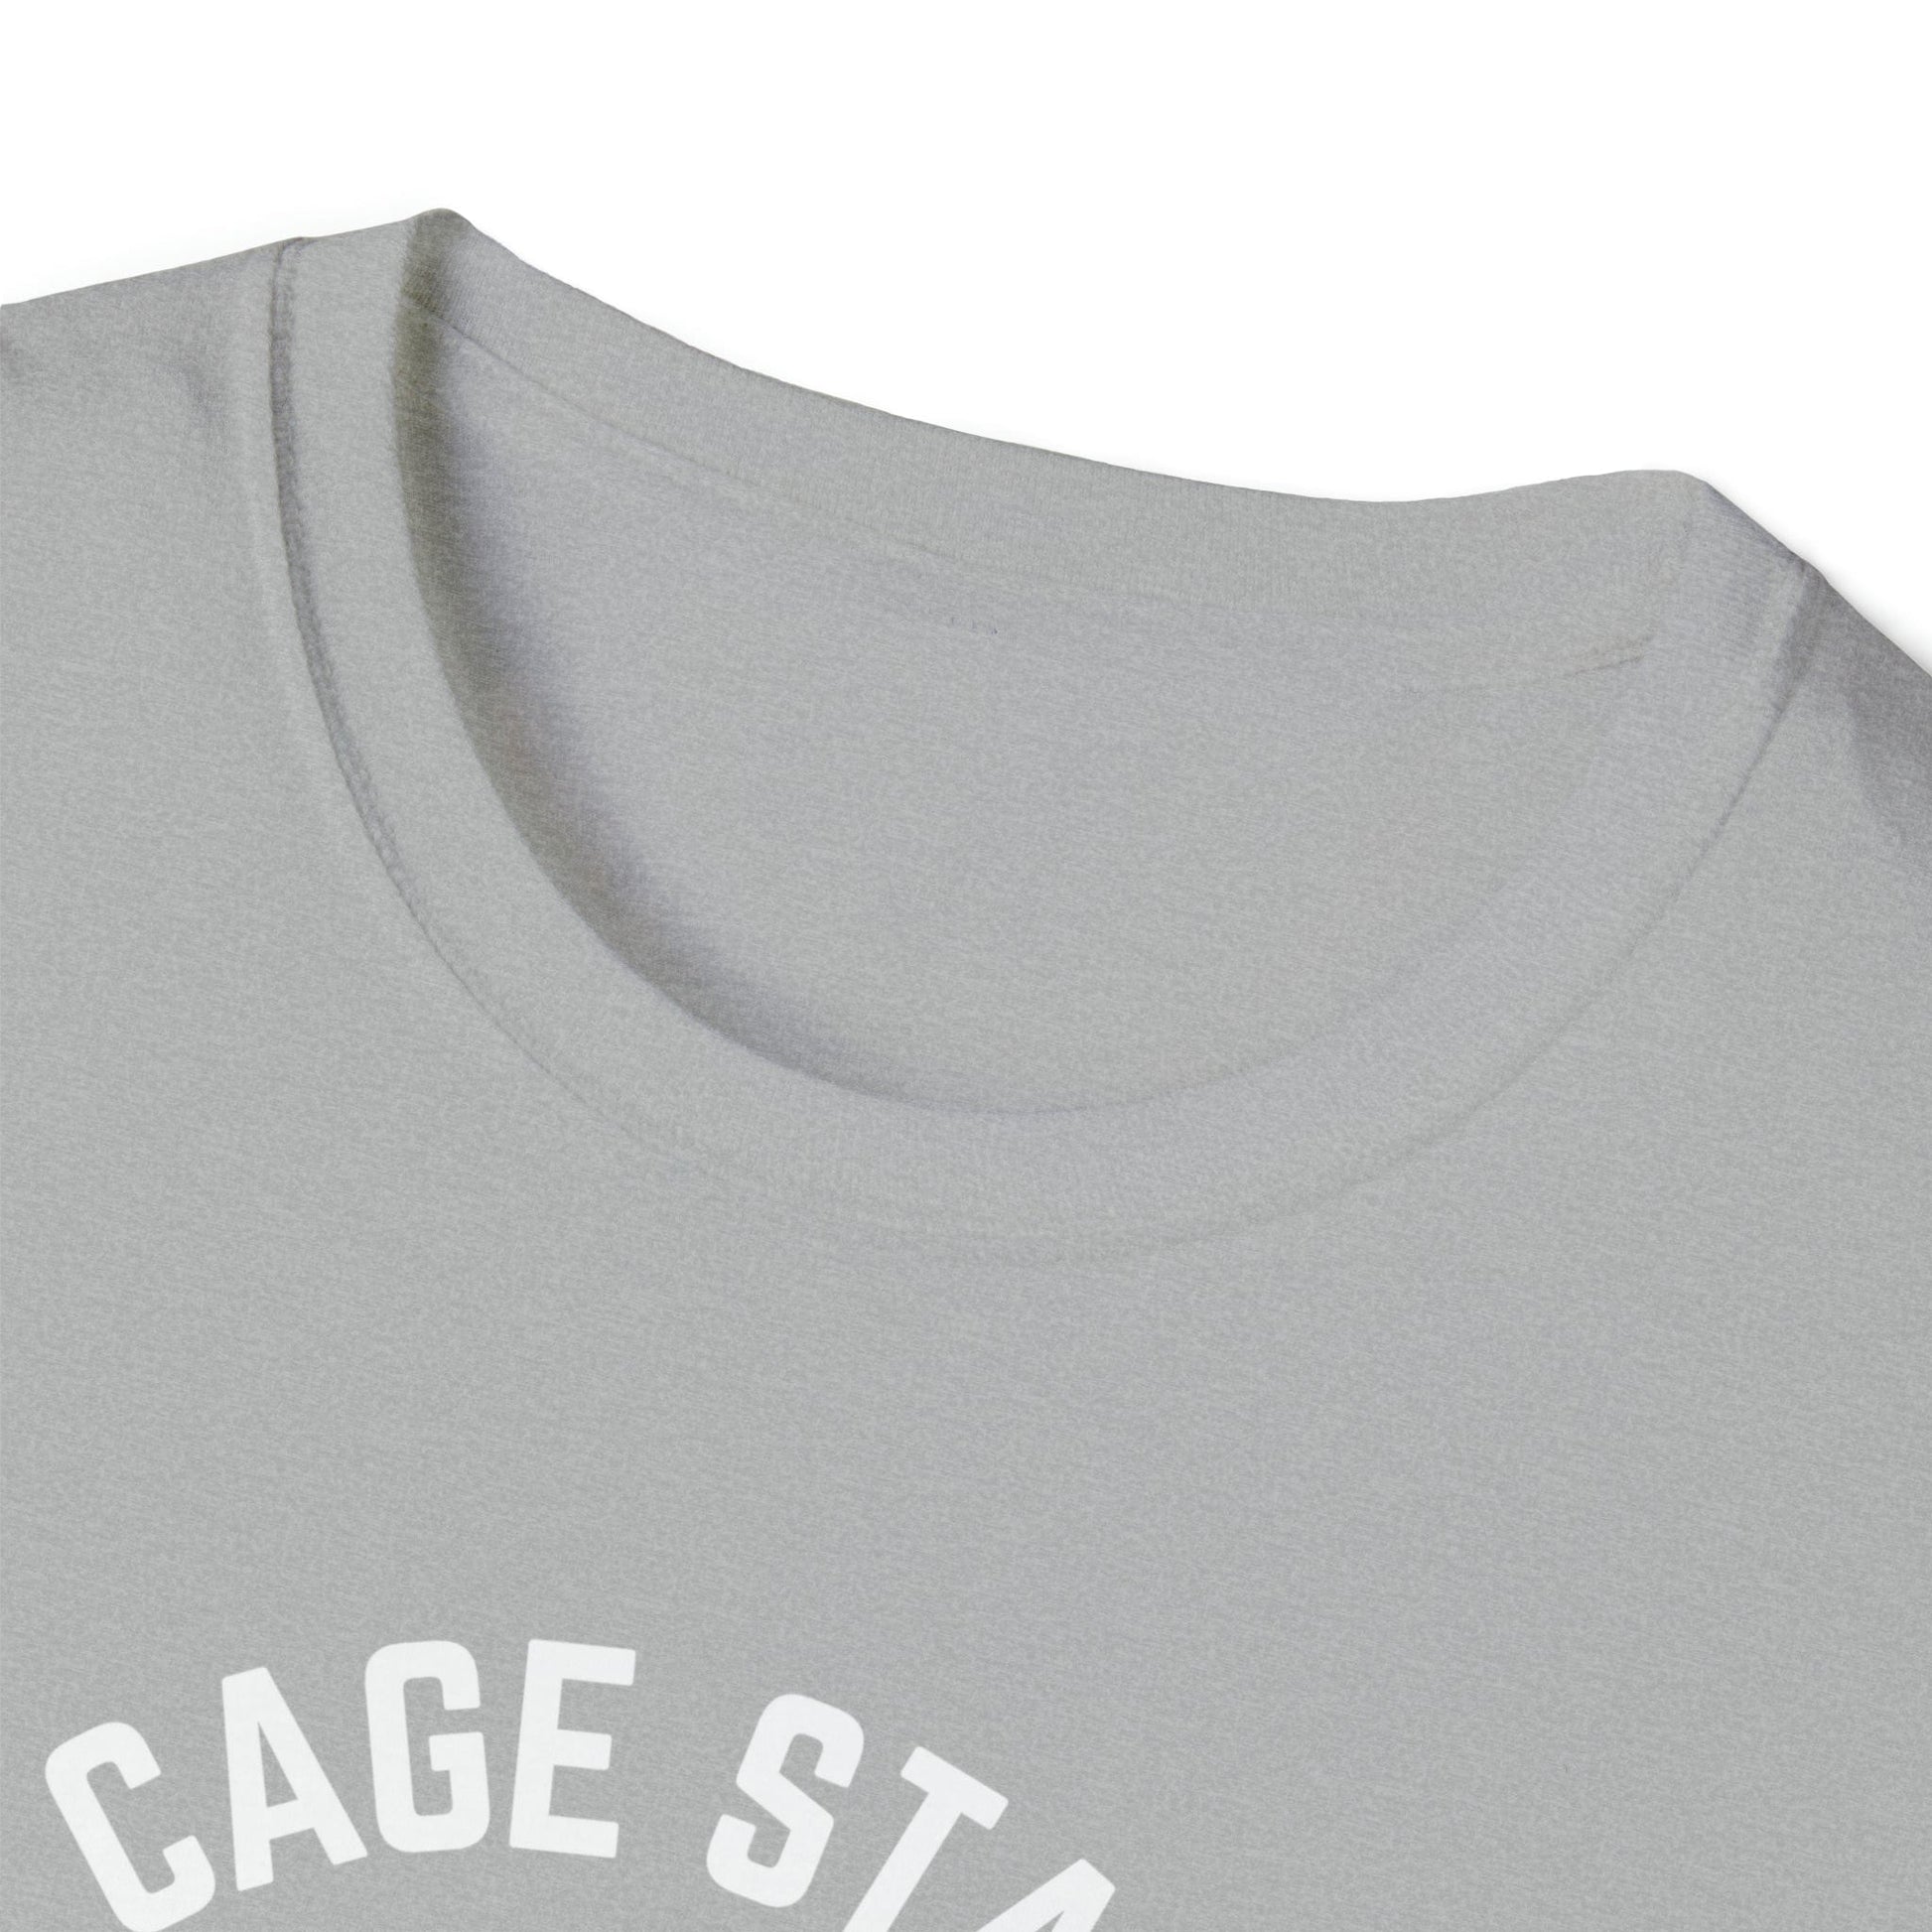 T-Shirt The Cage Stays On LUX - Chastity Tshirt LEATHERDADDY BATOR